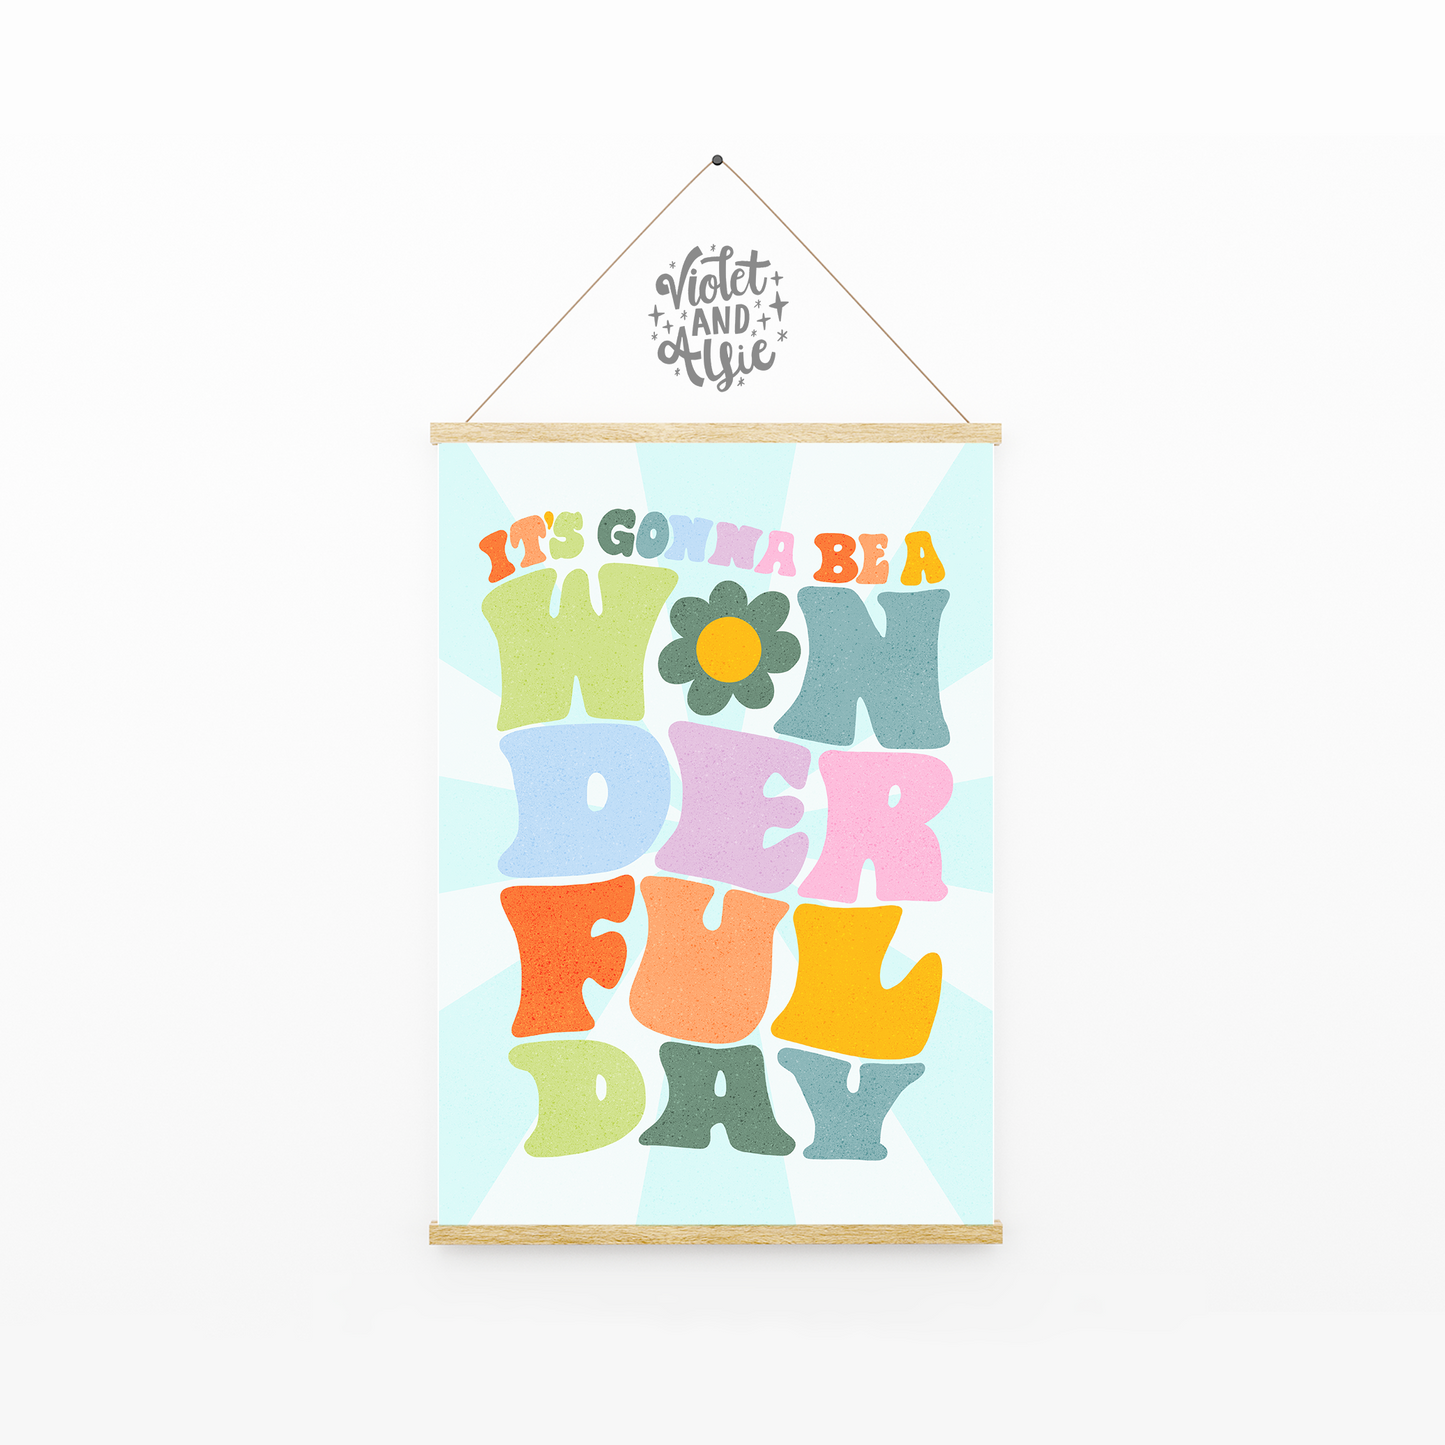 It's Gonna Be A Wonderful Day In gorgeously vibrant colours and a nostalgic retro style, this positive print will make sure you start your day with a smile! Wonderful Day Print, Retro Aesthetic Wall Art, Positivity Poster, Seventies Aesthetic prints, maximalist wall art, prints for colourful gallery wall, bright wall art, prints for walls